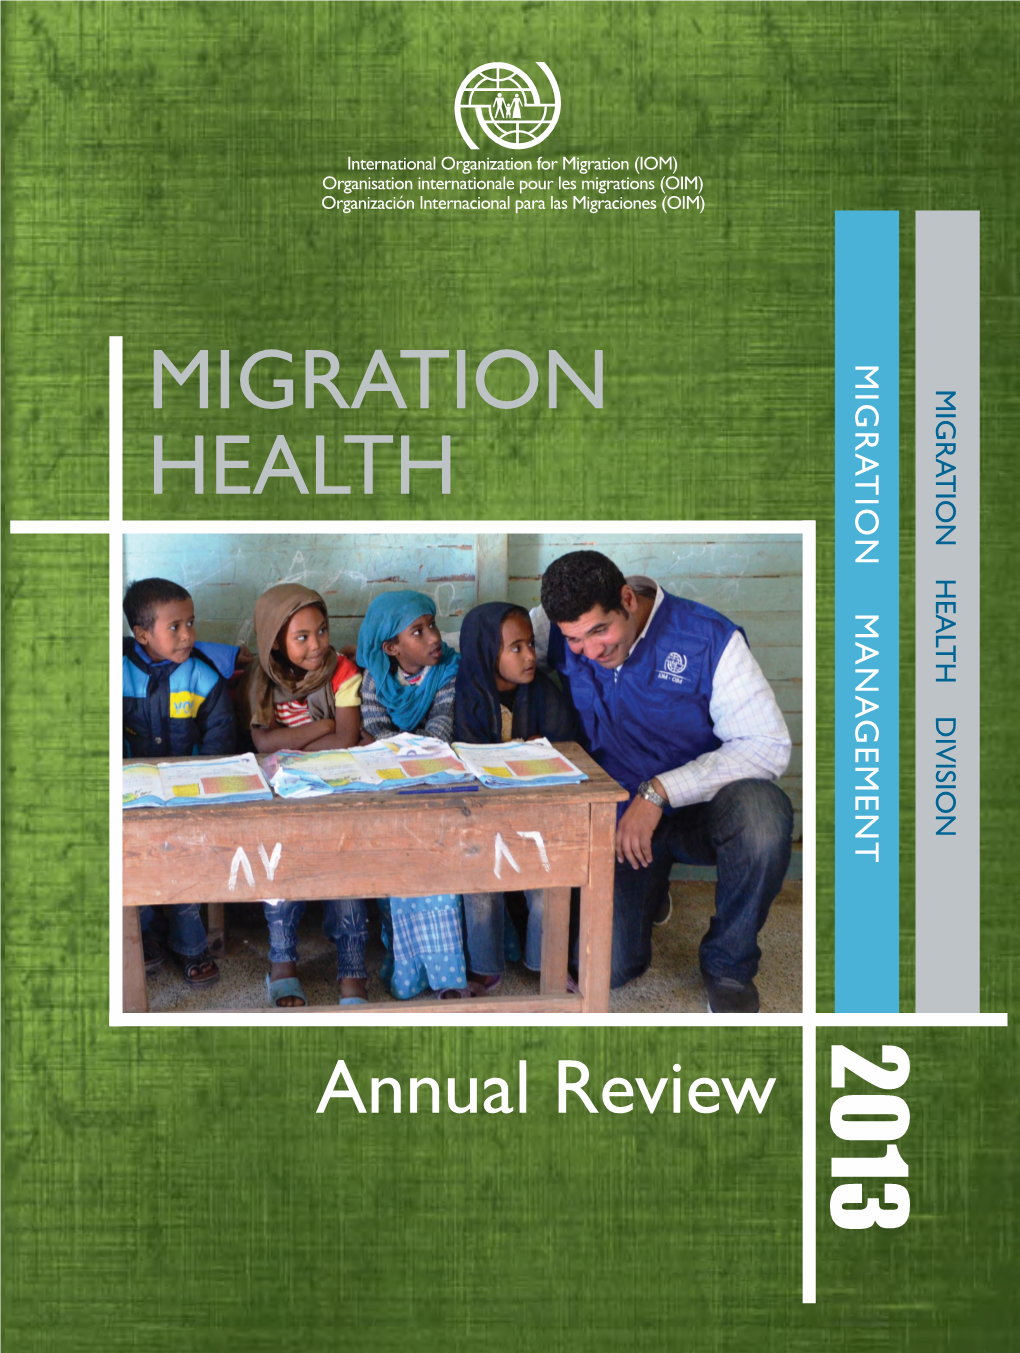 MIGRATION HEALTH DIVISION MIGRATION MANAGEMENT 2013 Annual Review Annual MIGRATION HEALTH